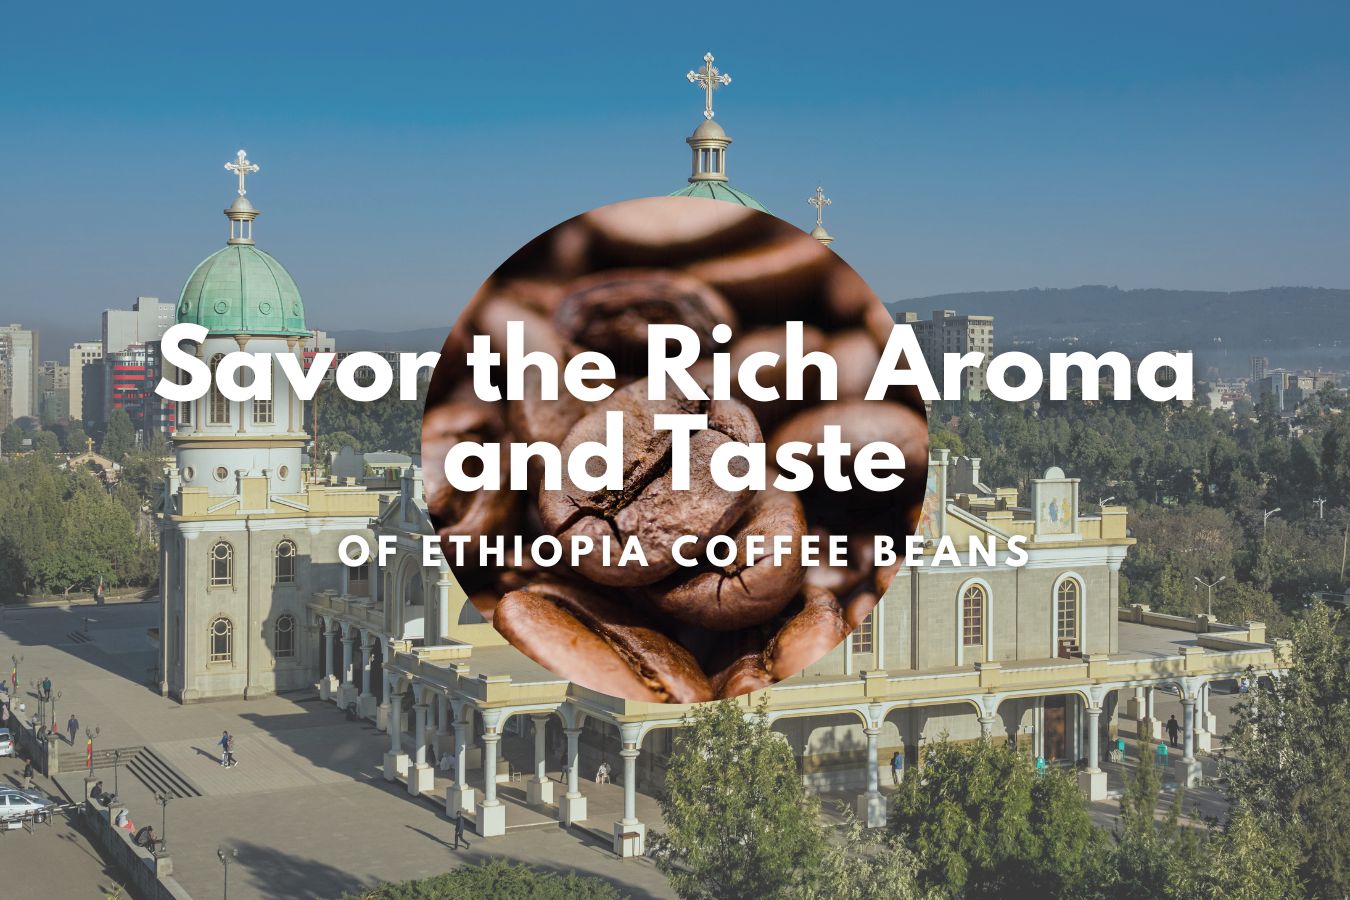 Savor the Rich Aroma and Taste of Ethiopia Coffee Beans